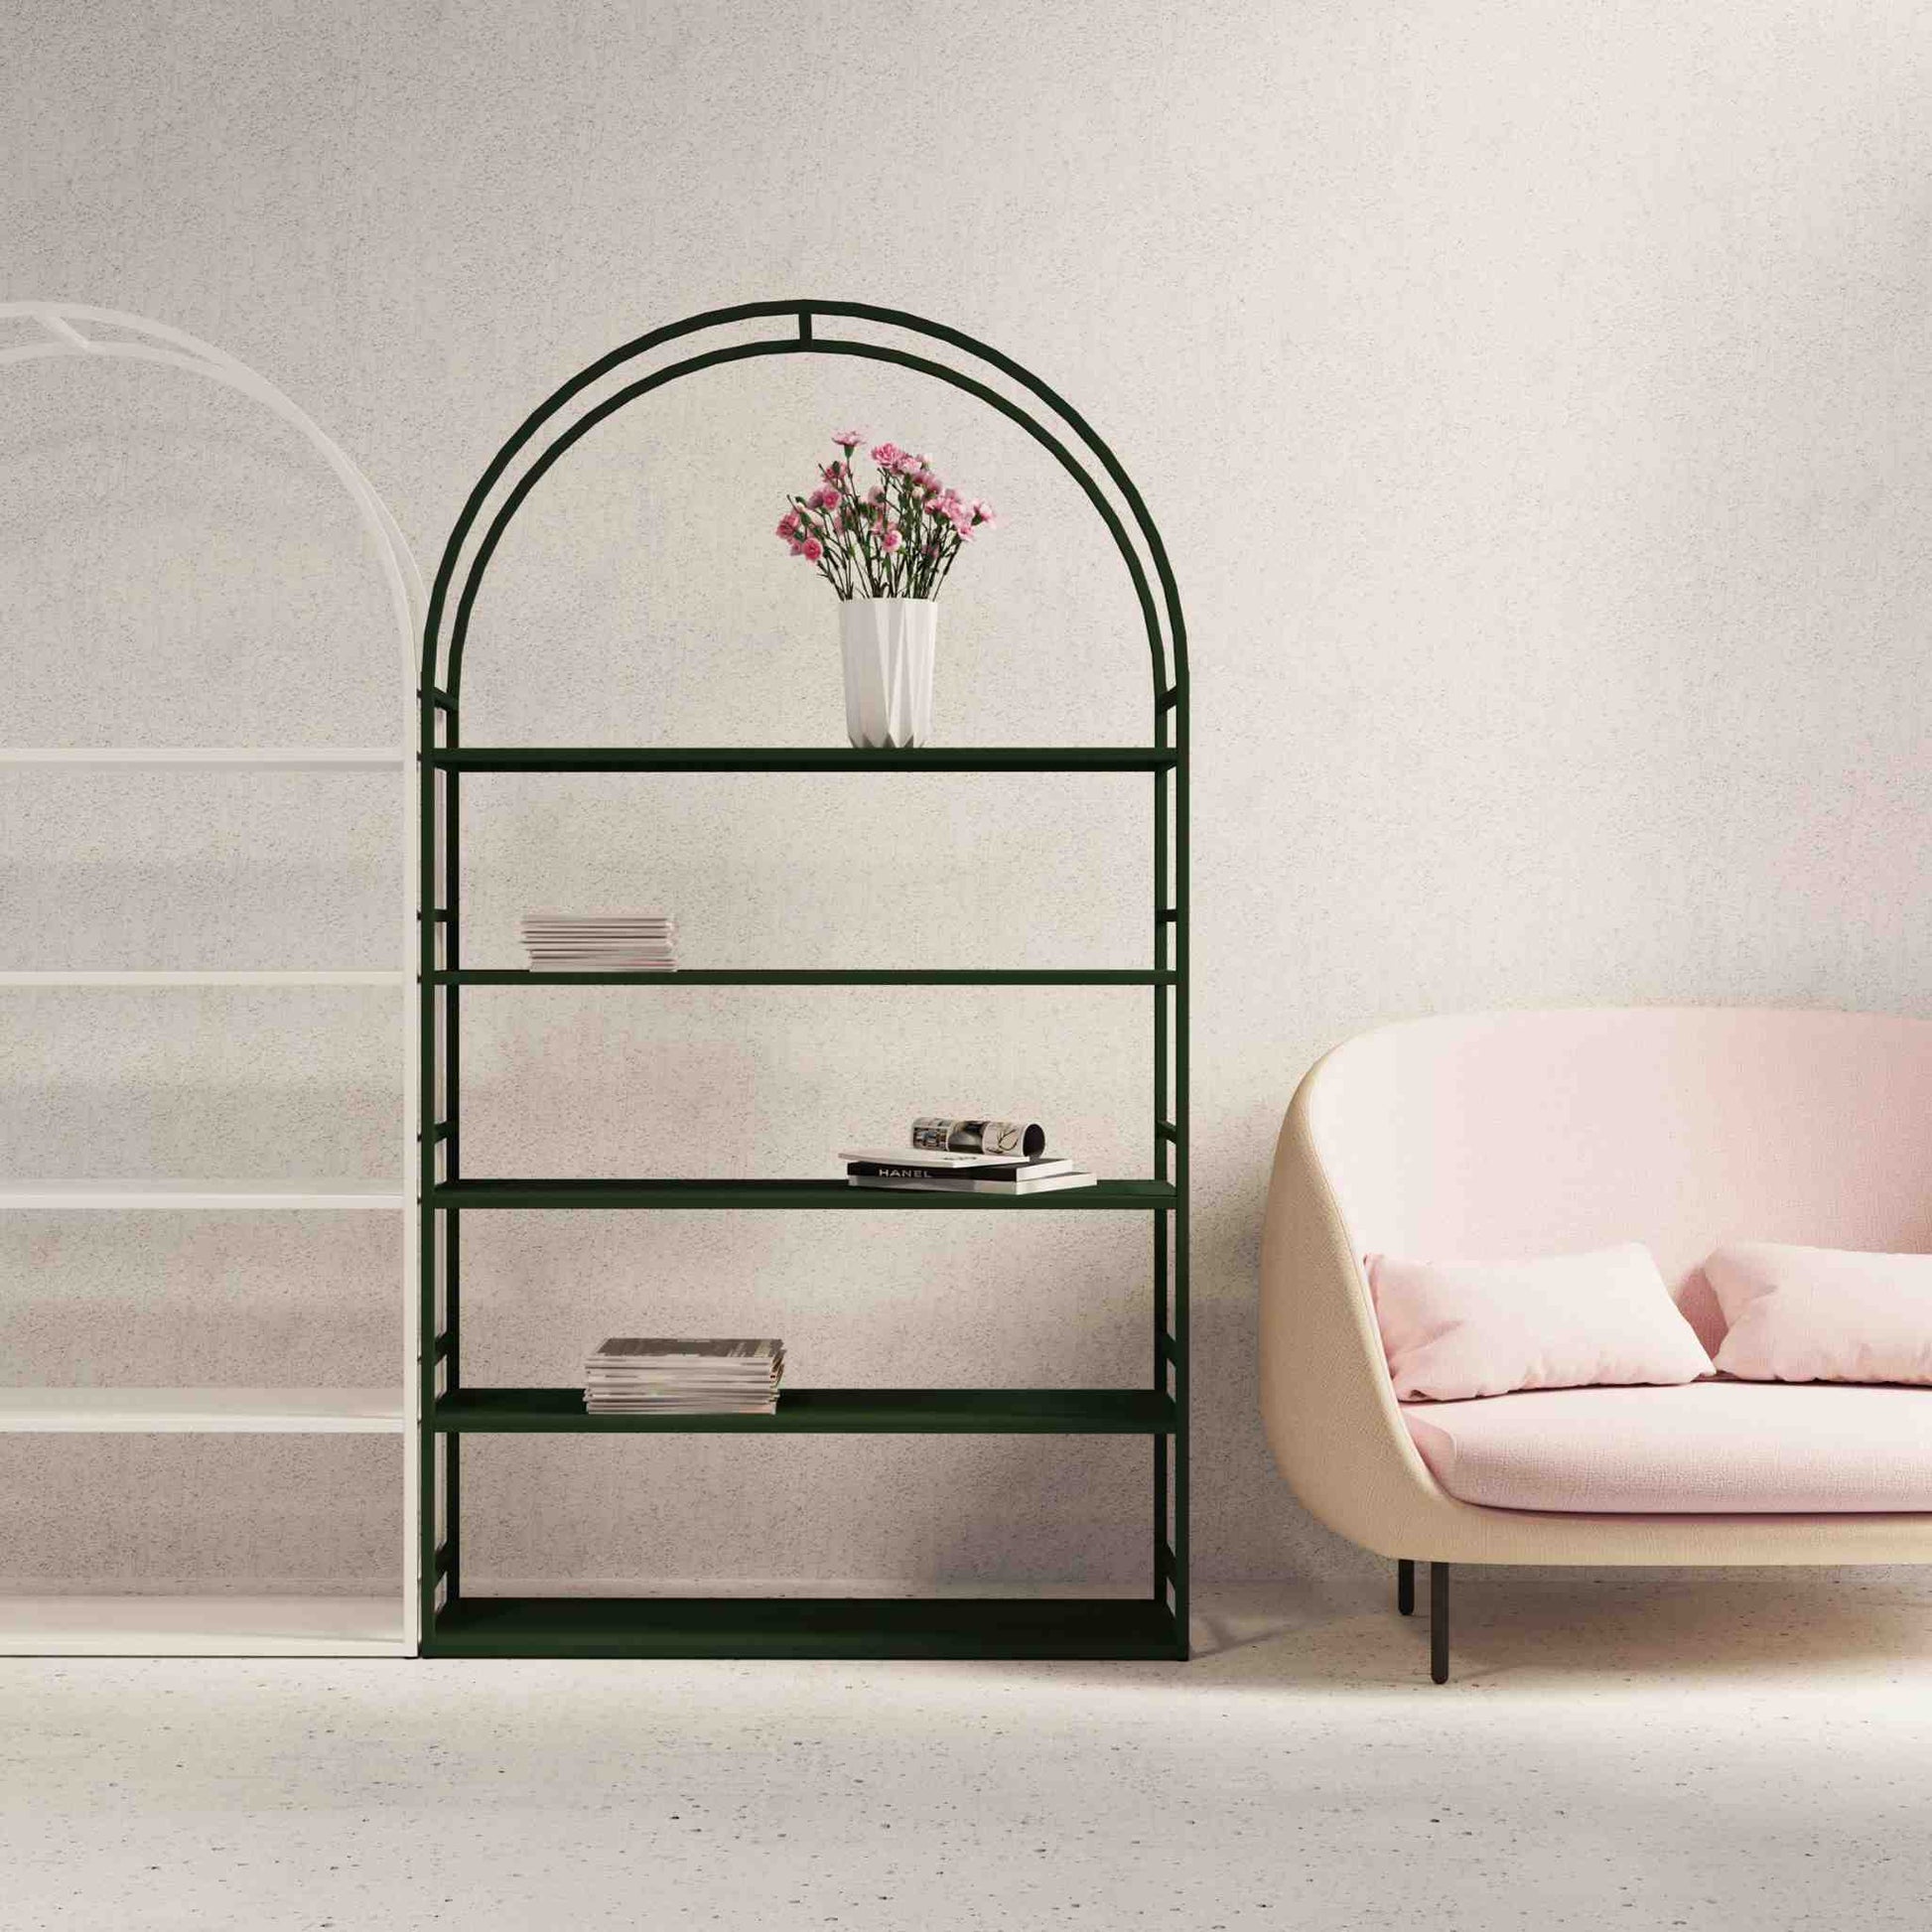 Interior arrangemenet with the arched bookcase Arkada 03, available in Switzerland through ÉTAUDORÉ, made from highest quality powdered coated steel in white